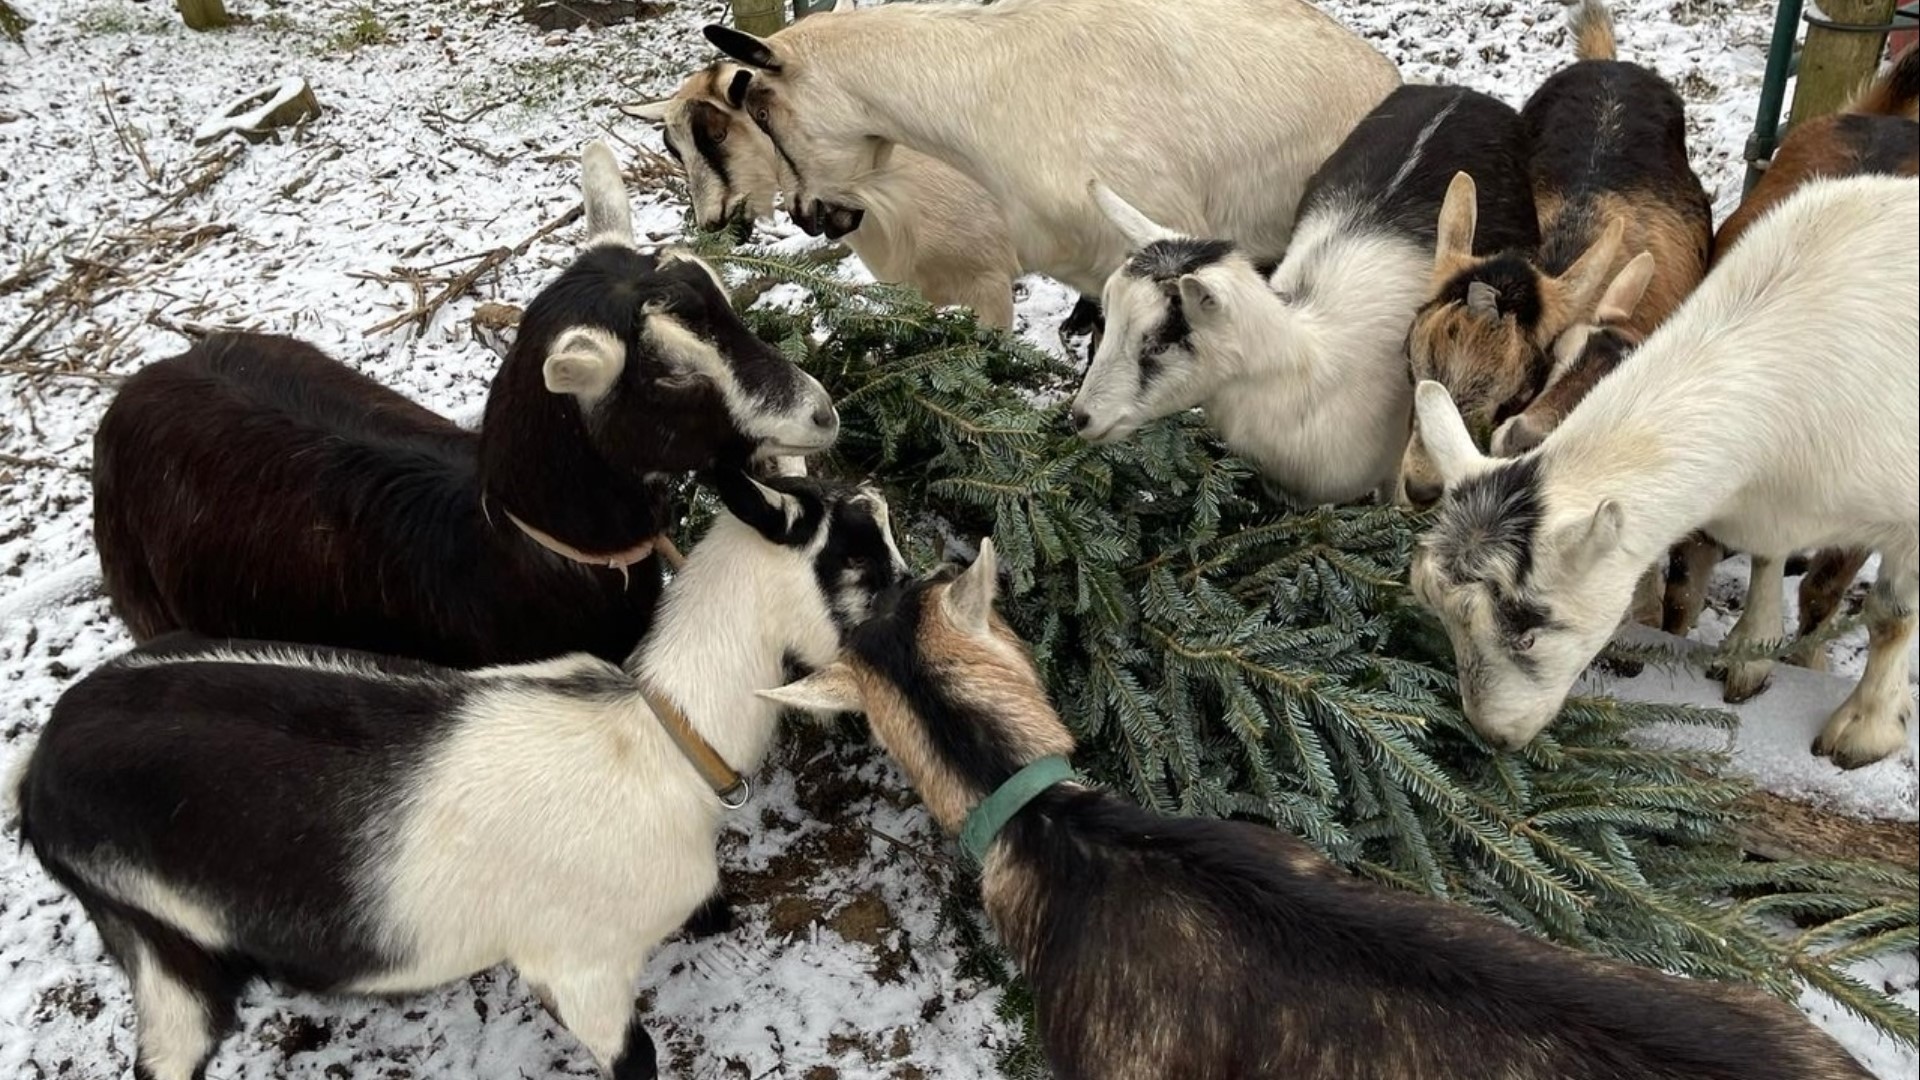 Rather than toss your tree this year, you can donate it to the herd, who believe it or not, find Christmas trees delicious.